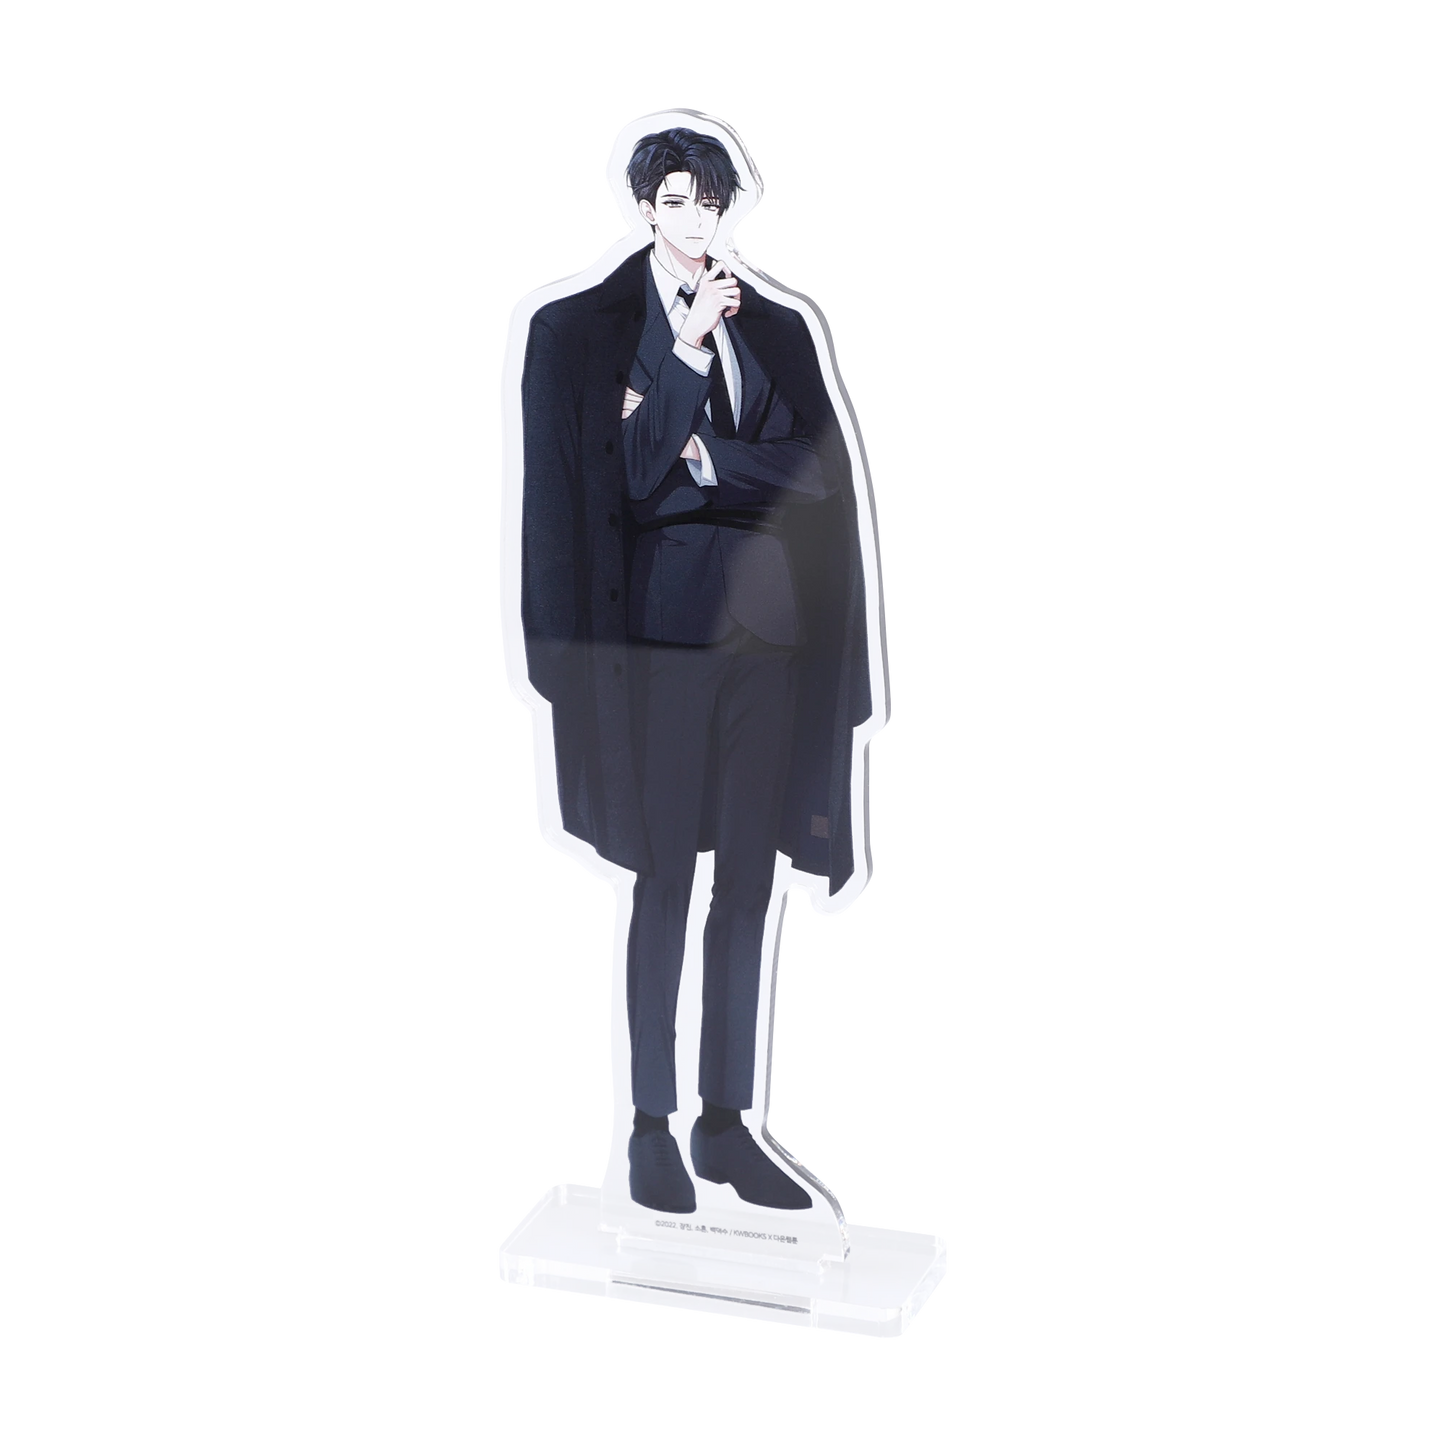 Debut or Die VTIC Cheongryeo Acrylic Stand